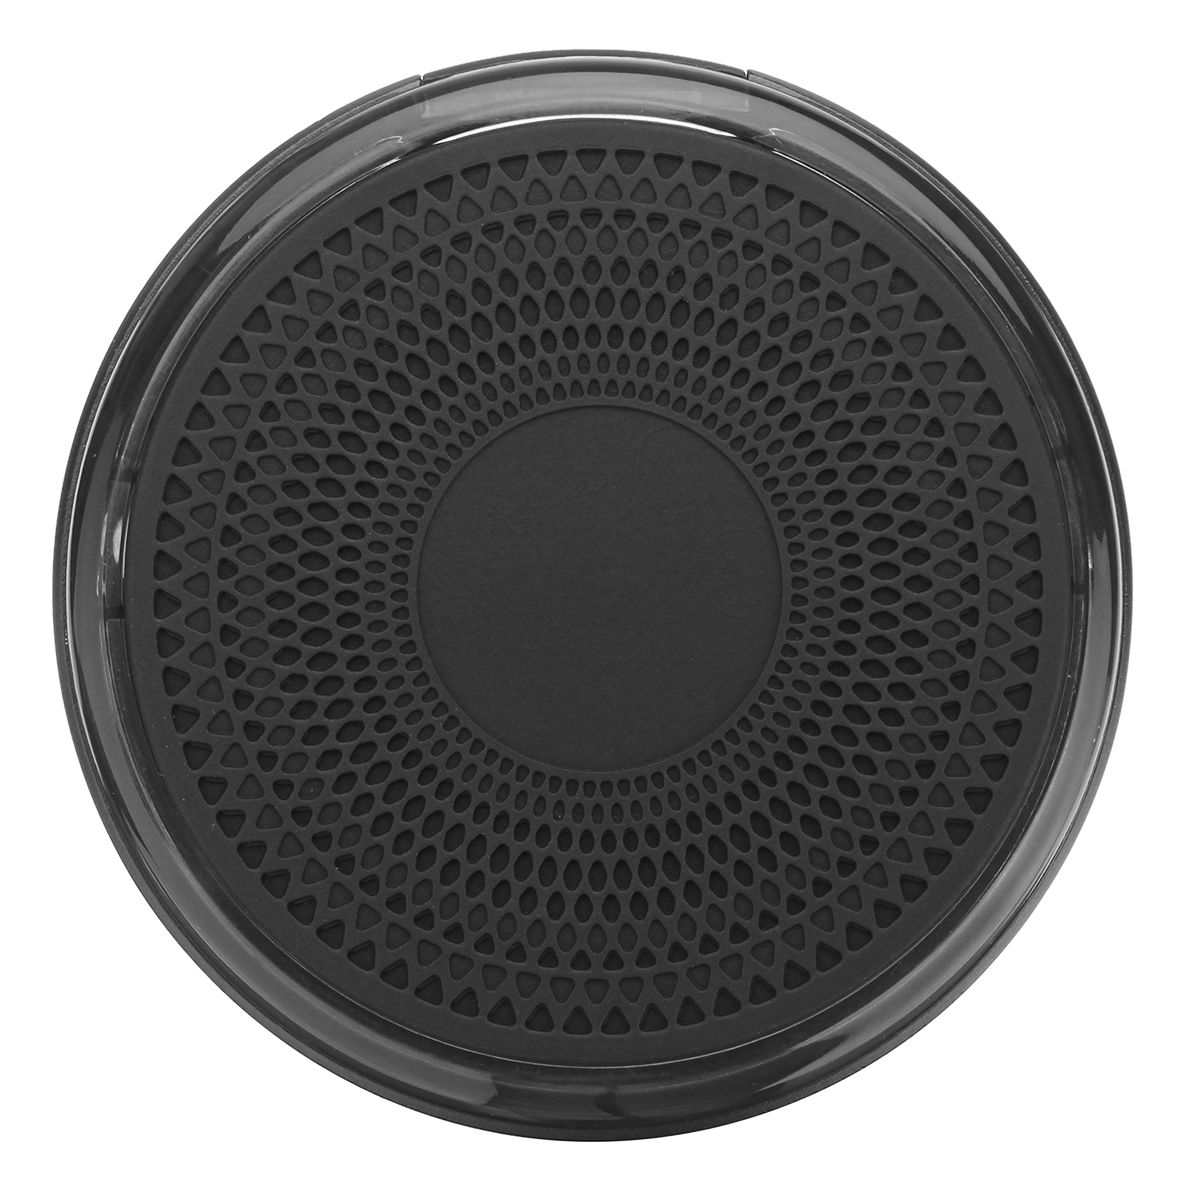 S7-TWS-Waterproof-bluetooth-42-Wireless-Speaker-with-Noice-Reduction-Microphone-Support-TF-Card-AUX-1268788